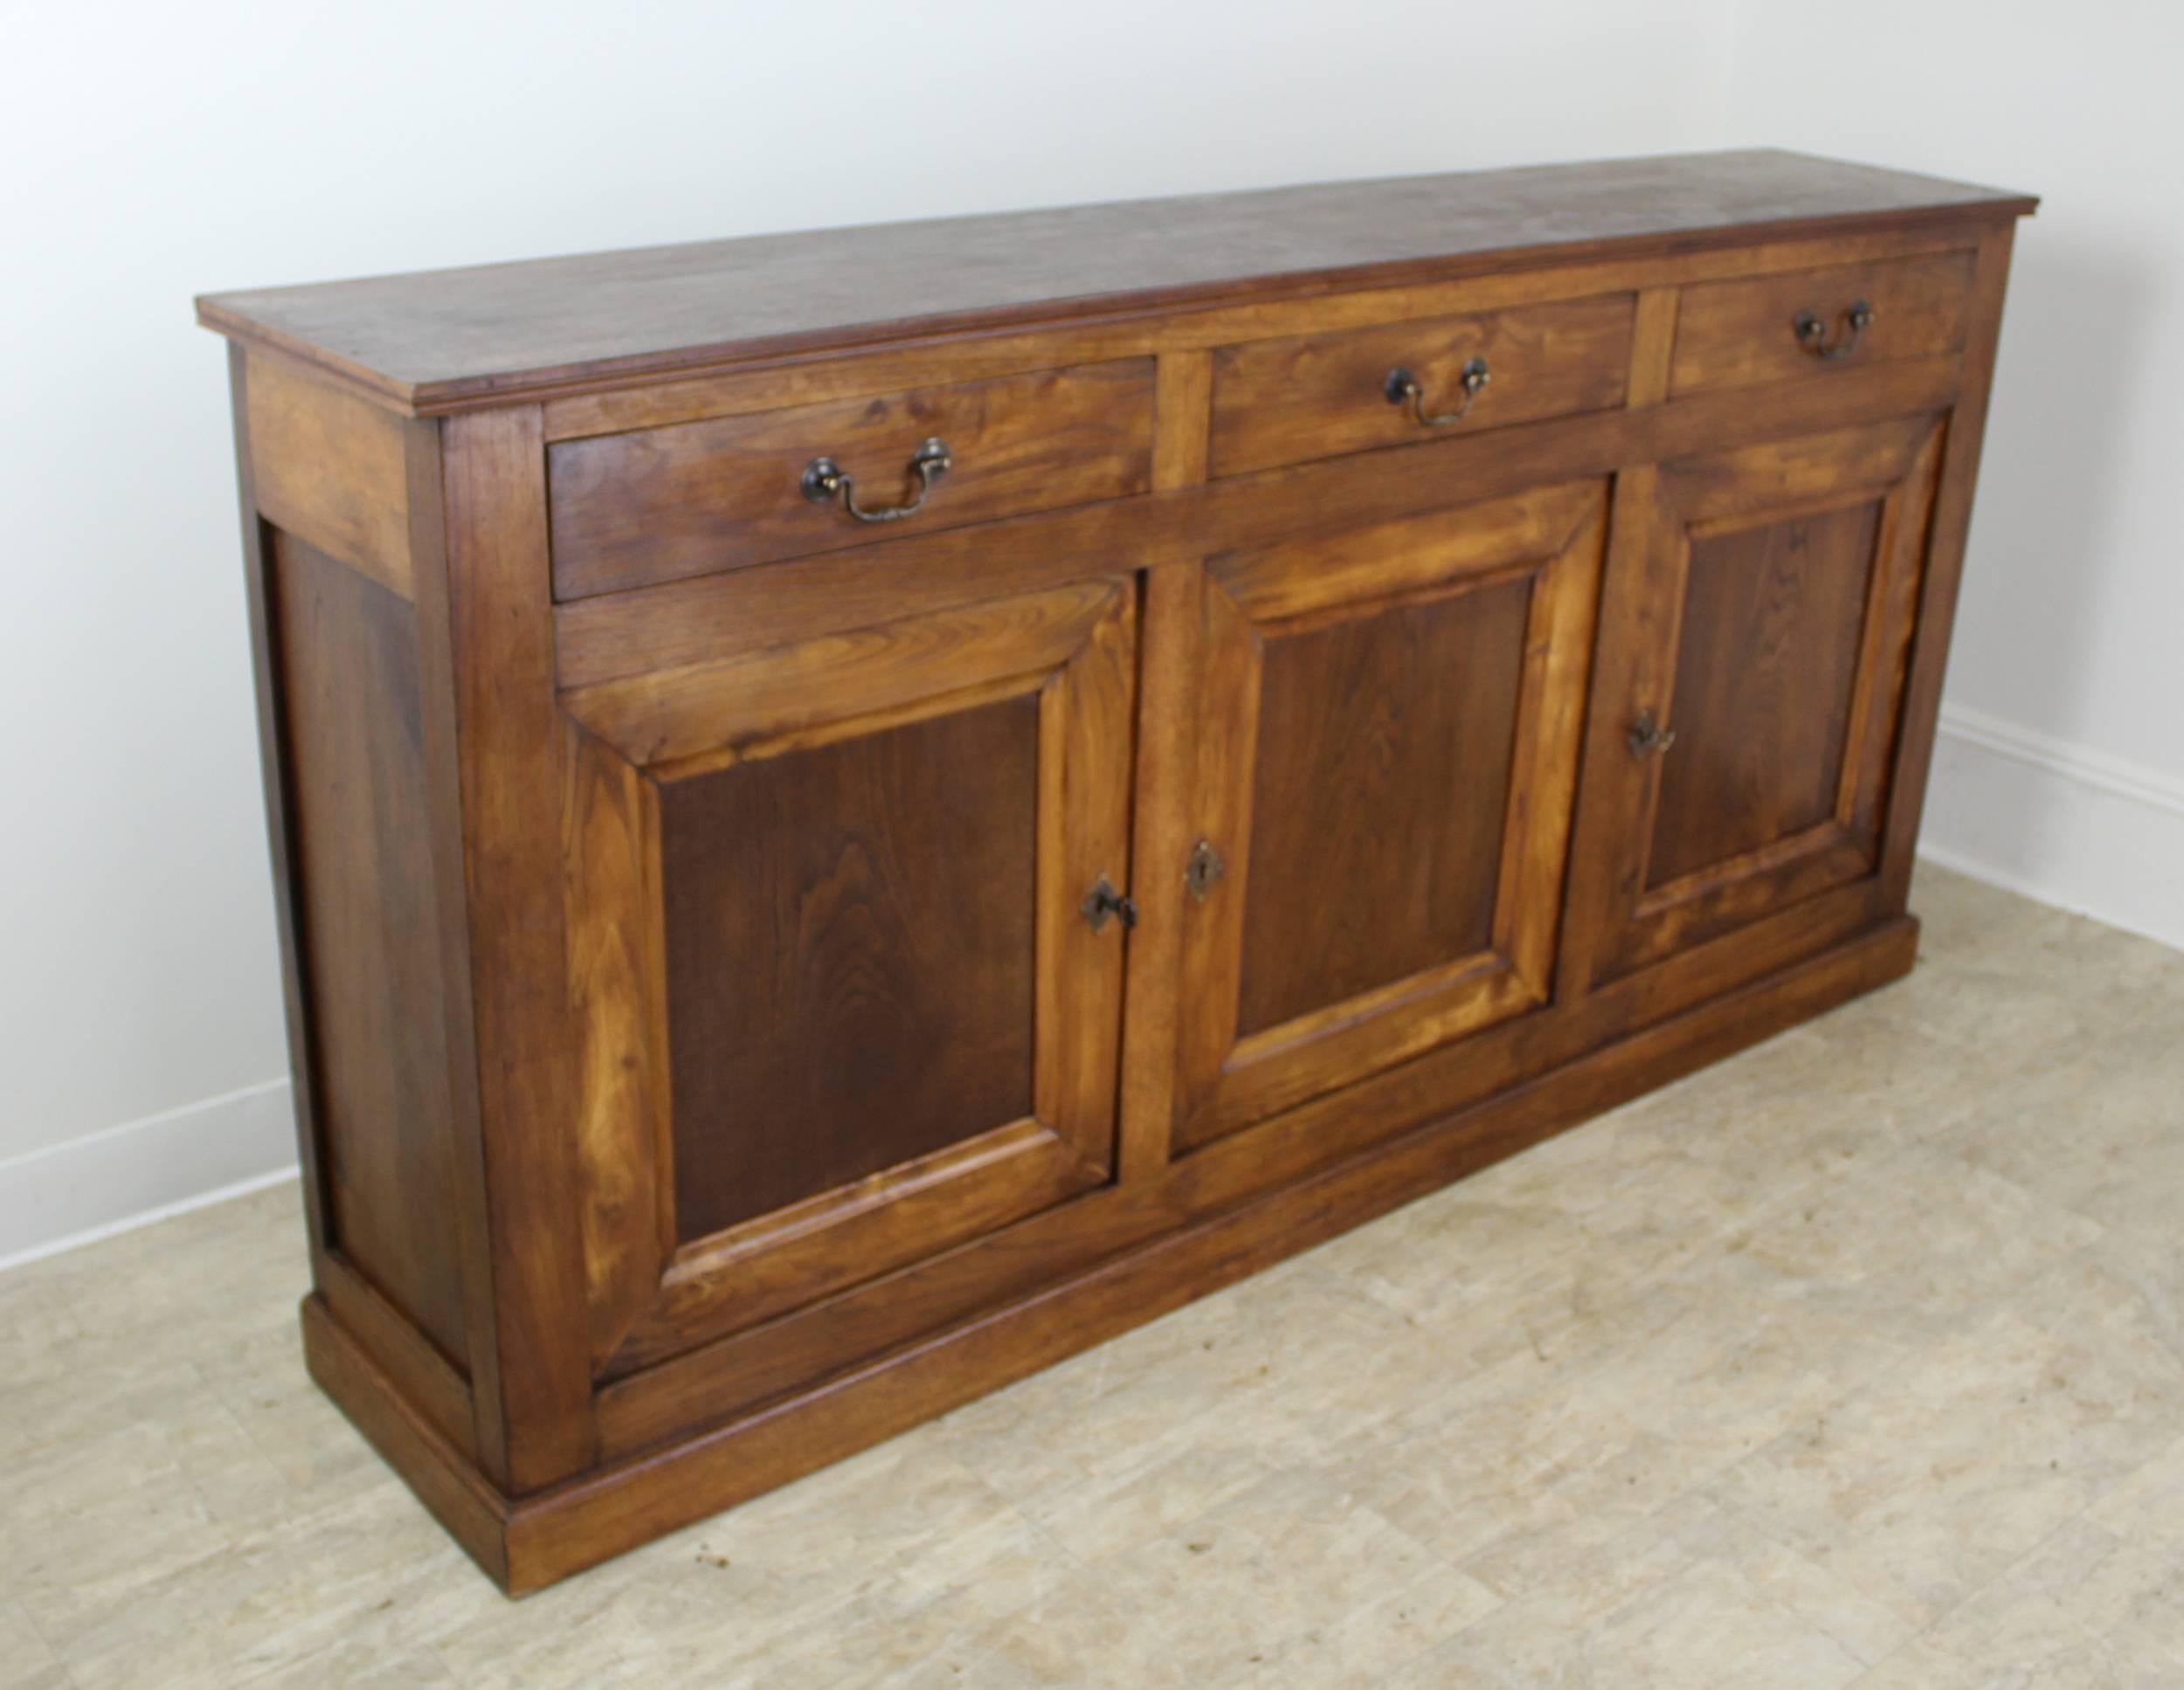 Very handsome console buffet or server, with three cupboard doors and drawers above. The walnut has the typical beautiful light and dark grain, and offers a very warm and elegant look. Very smart in the Louis Philippe style. Custom-made for Briggs